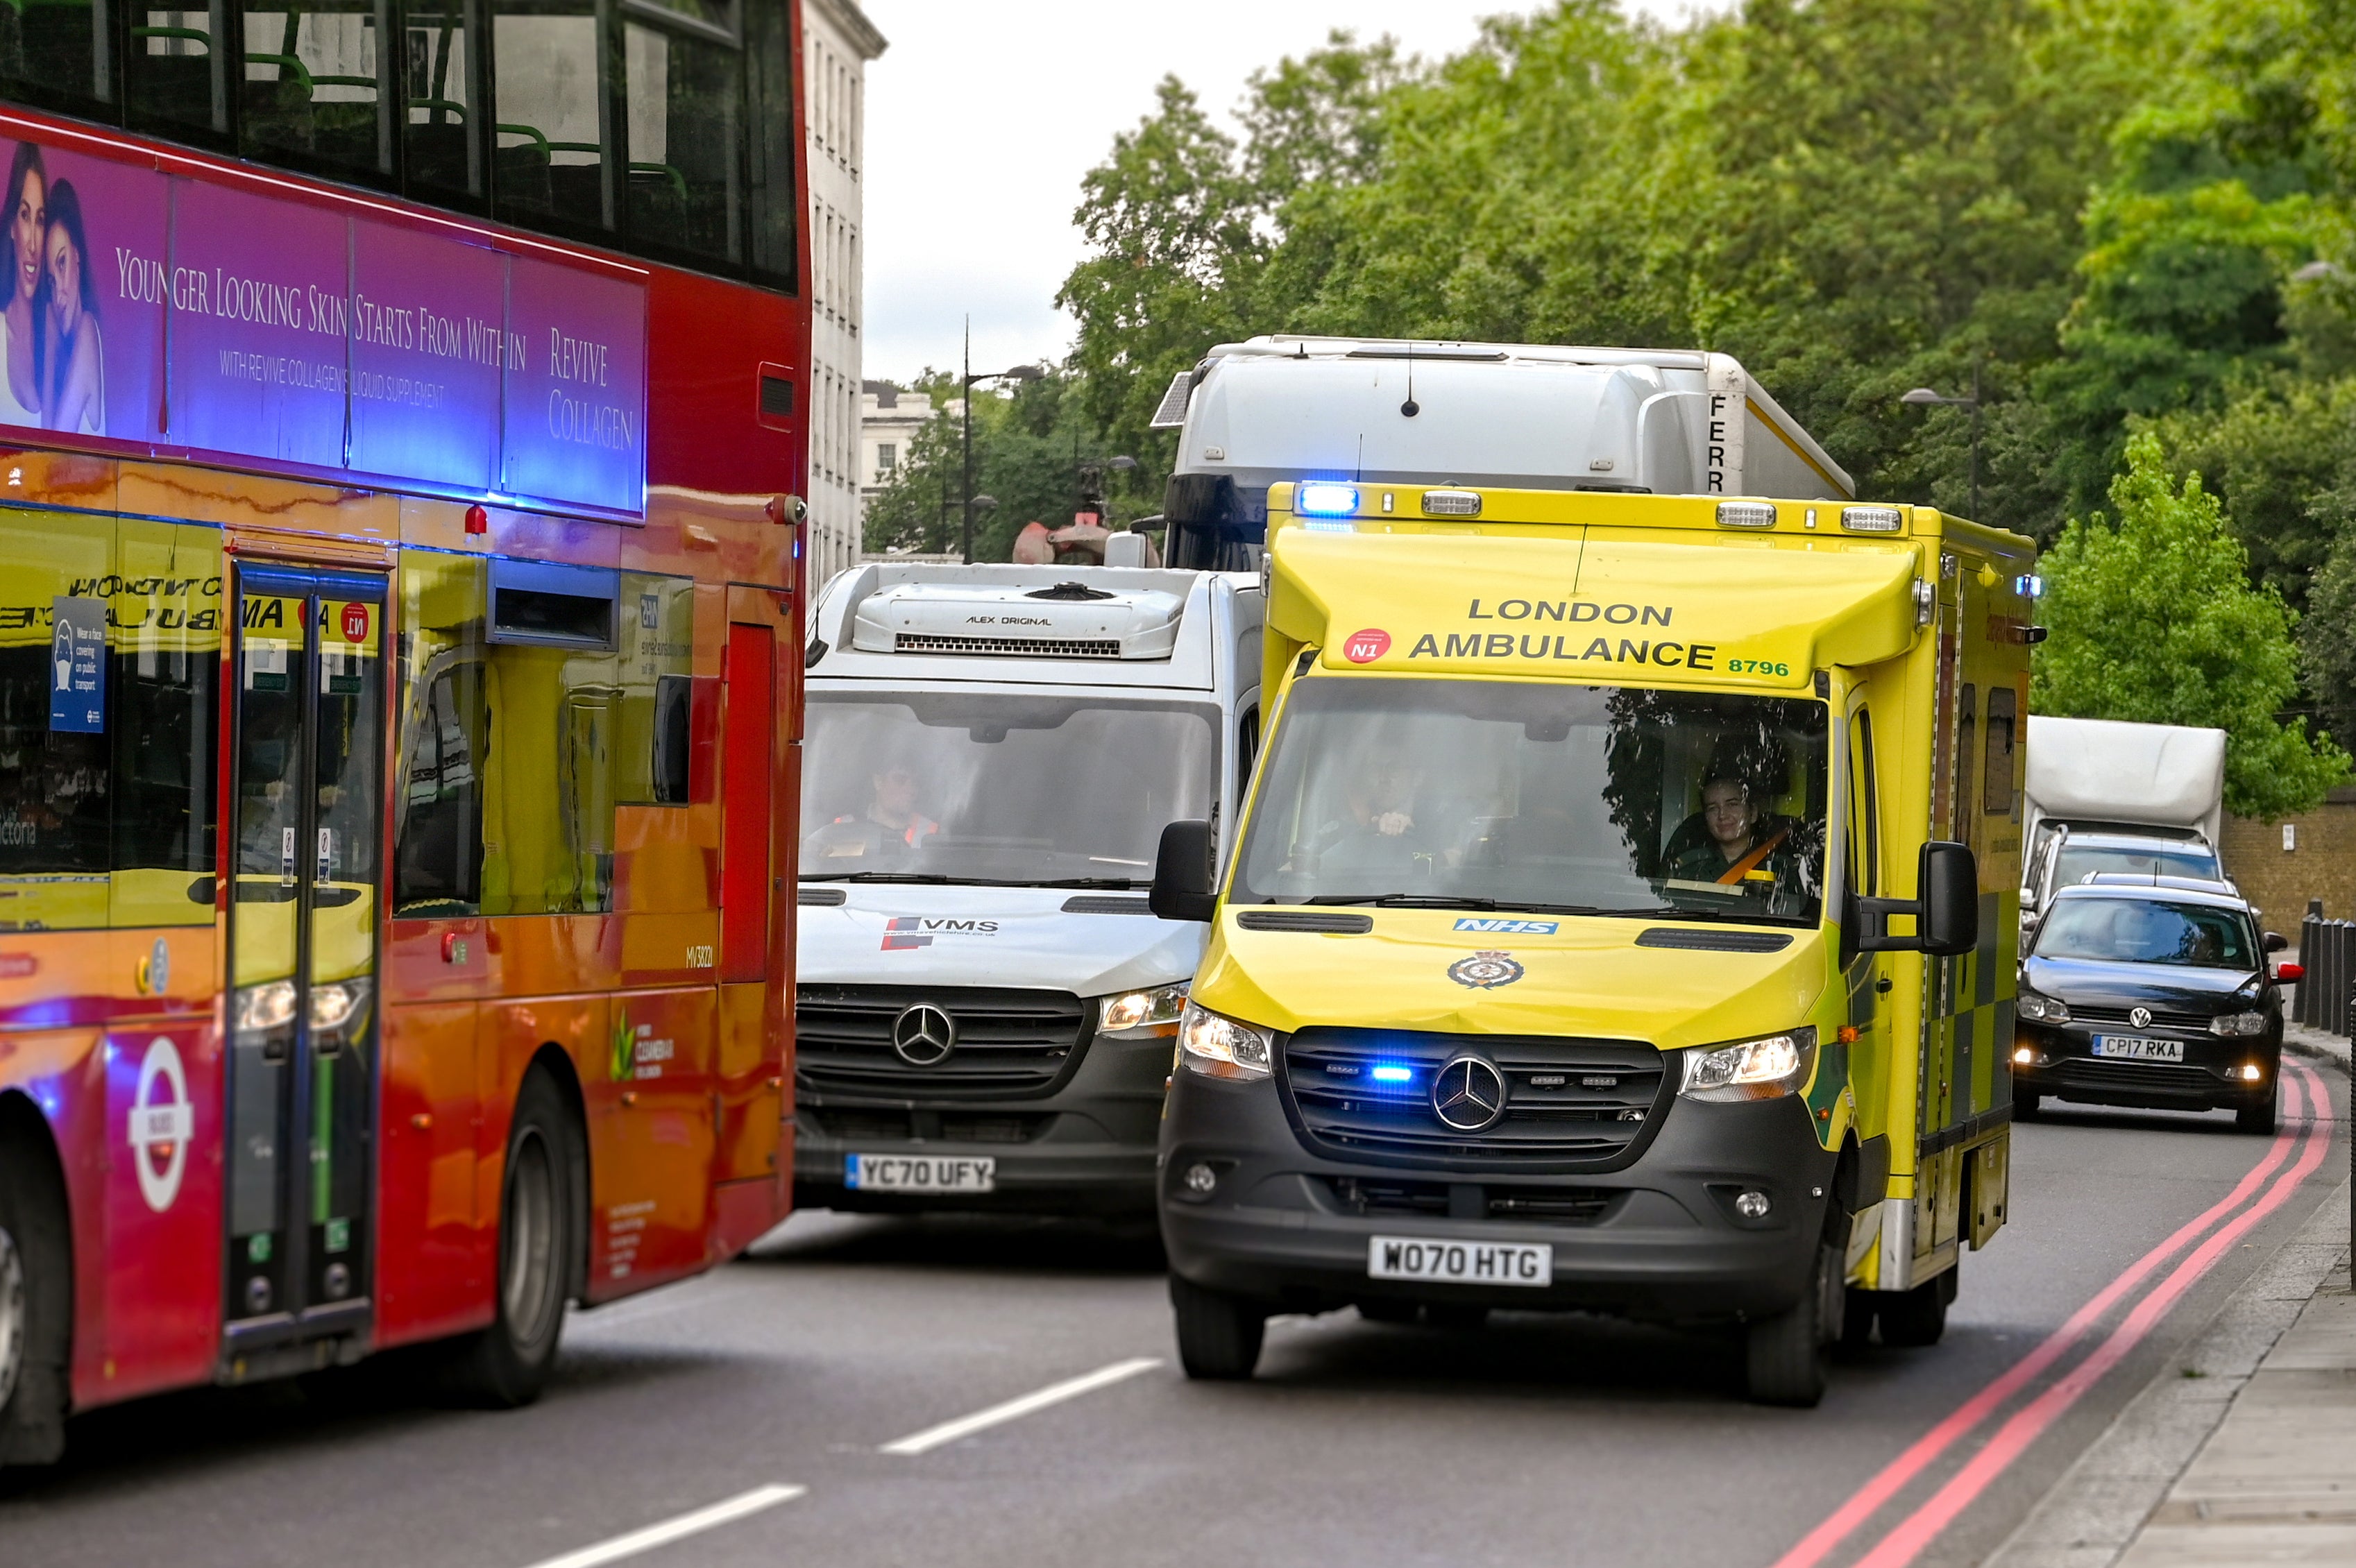 Drivers could be fined £1000 for letting ambulance pass